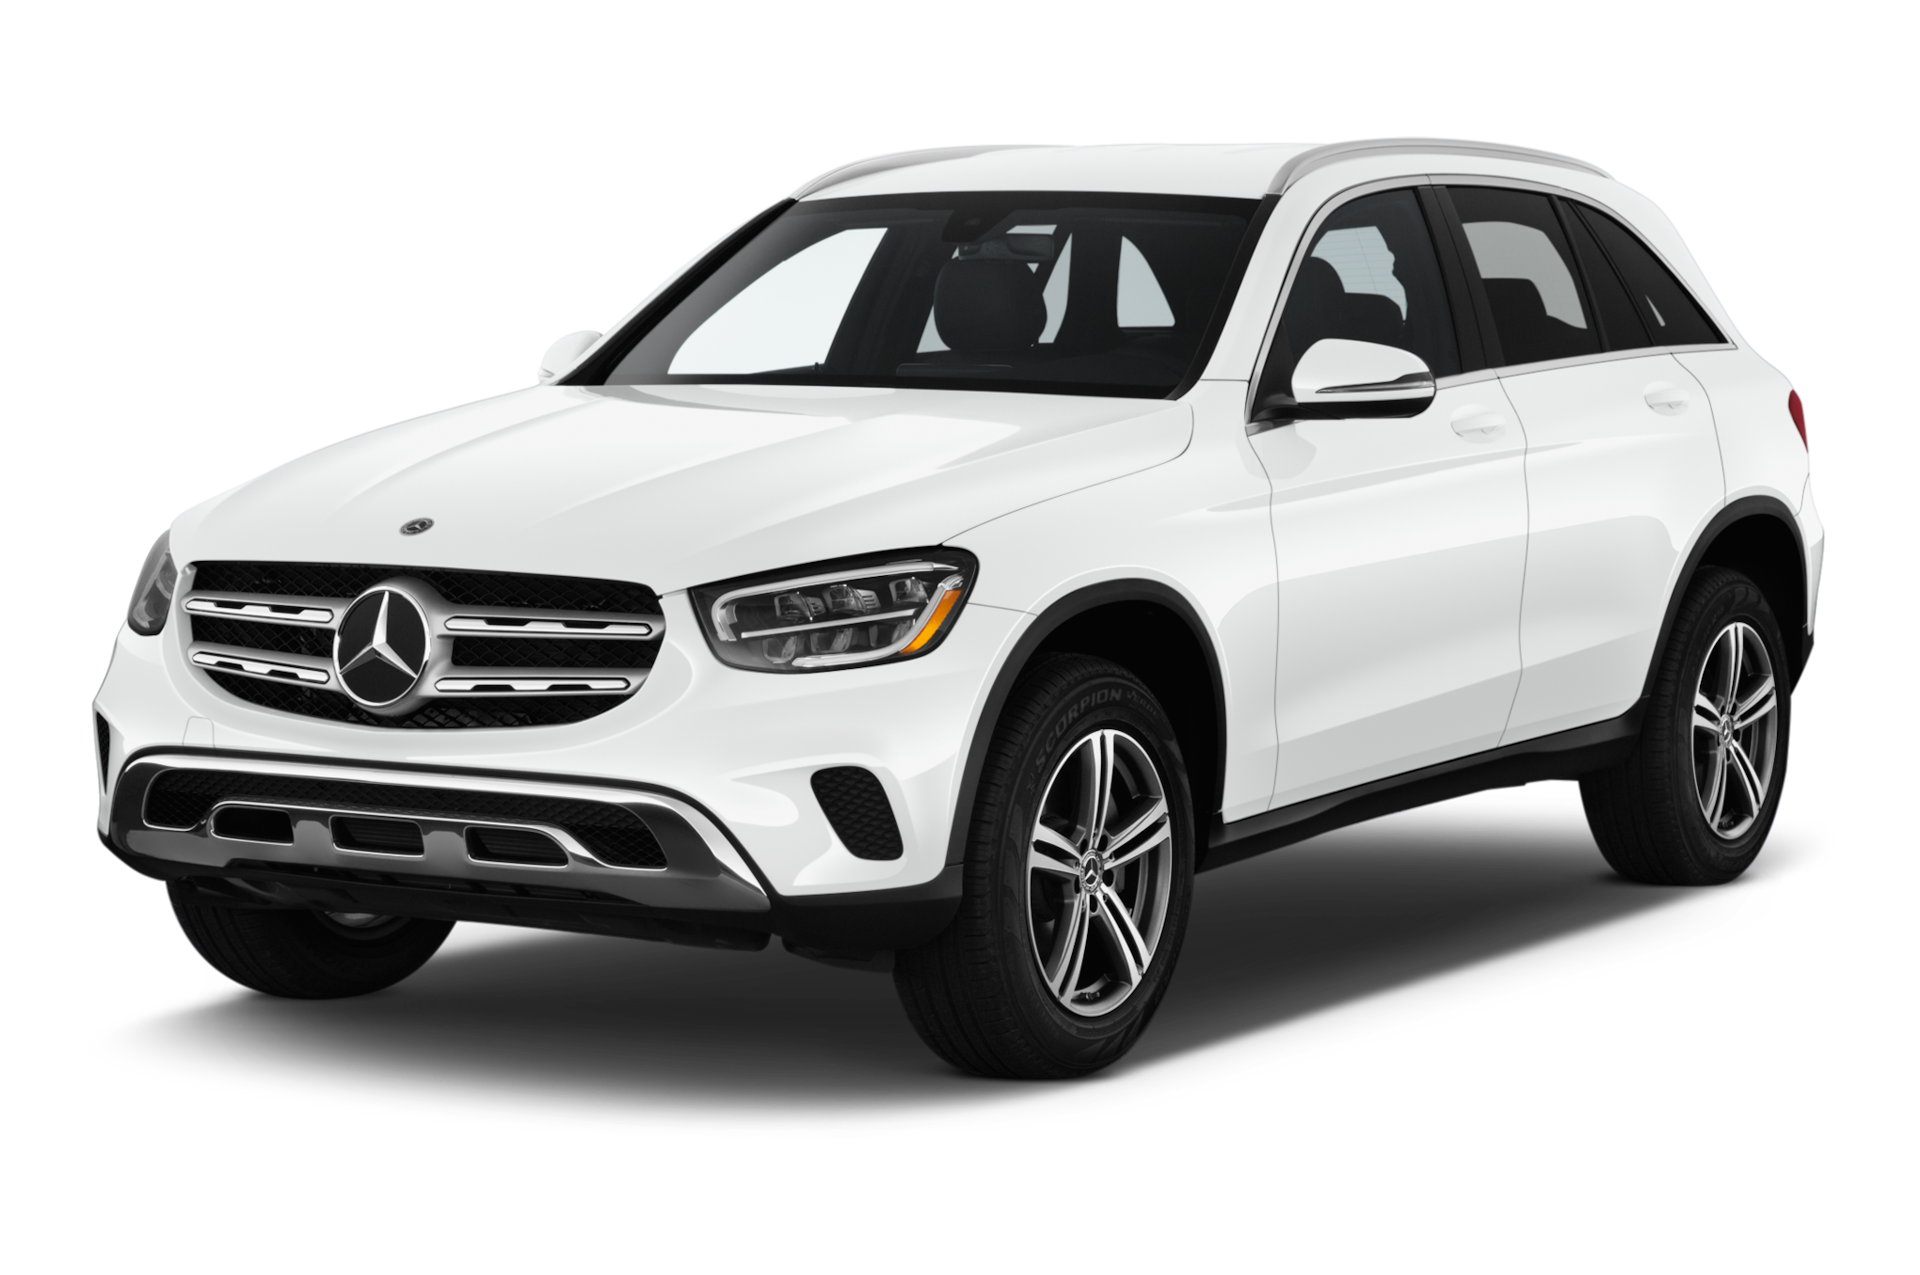 2020 Mercedes-Benz GLC-Class Prices, Reviews, and Photos - MotorTrend